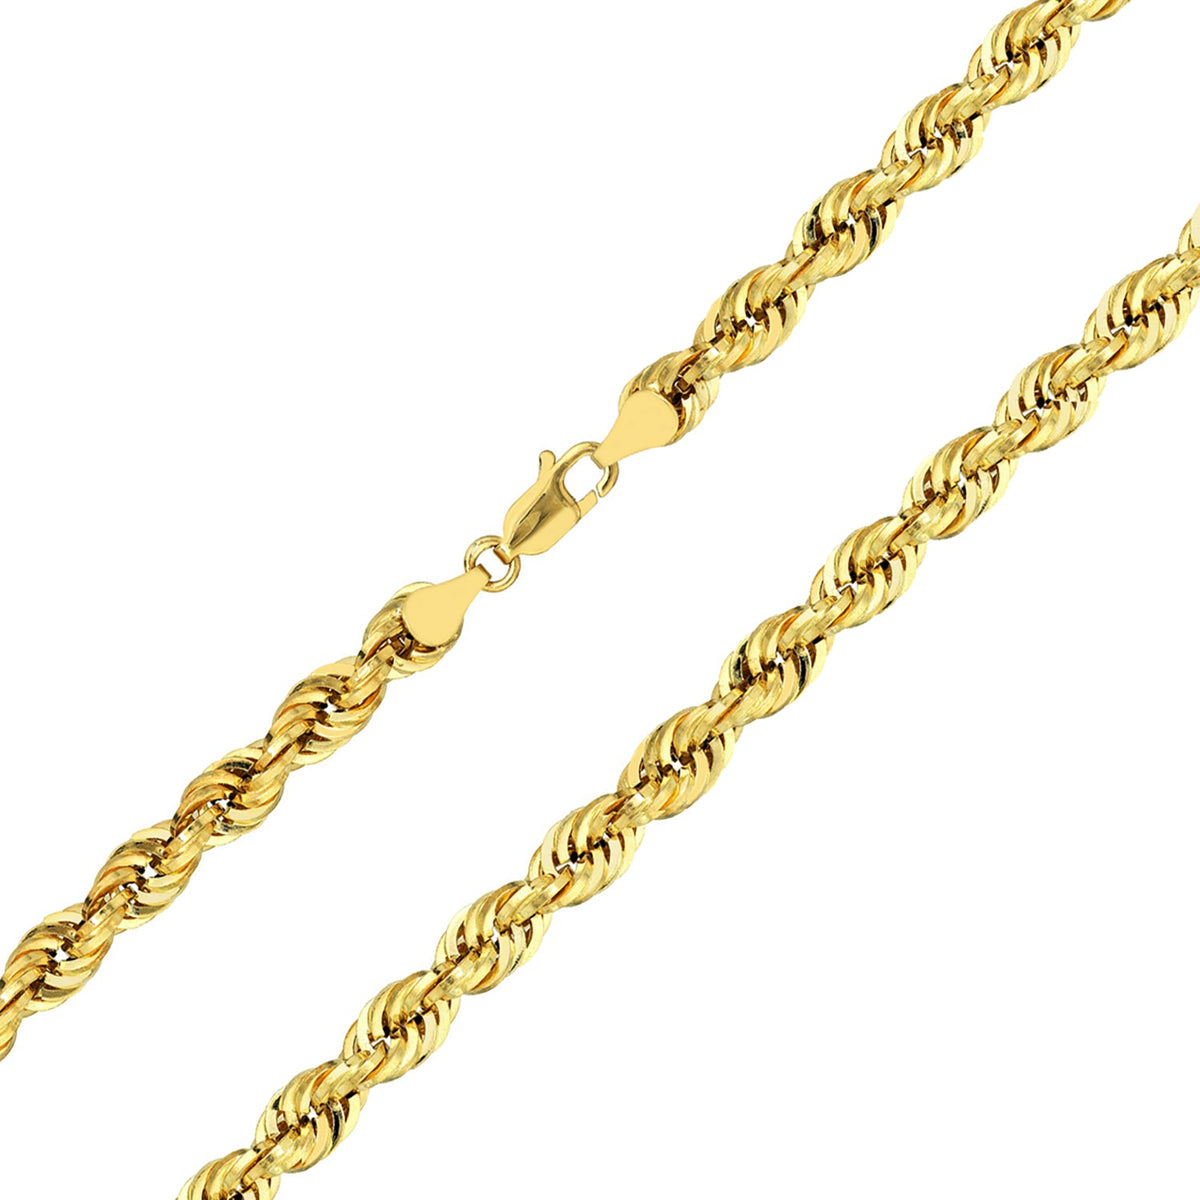 14k Yellow Gold Hollow 6mm Rope Chain Necklace with Lobster Lock - Light Rope Chain with Diamond Cut